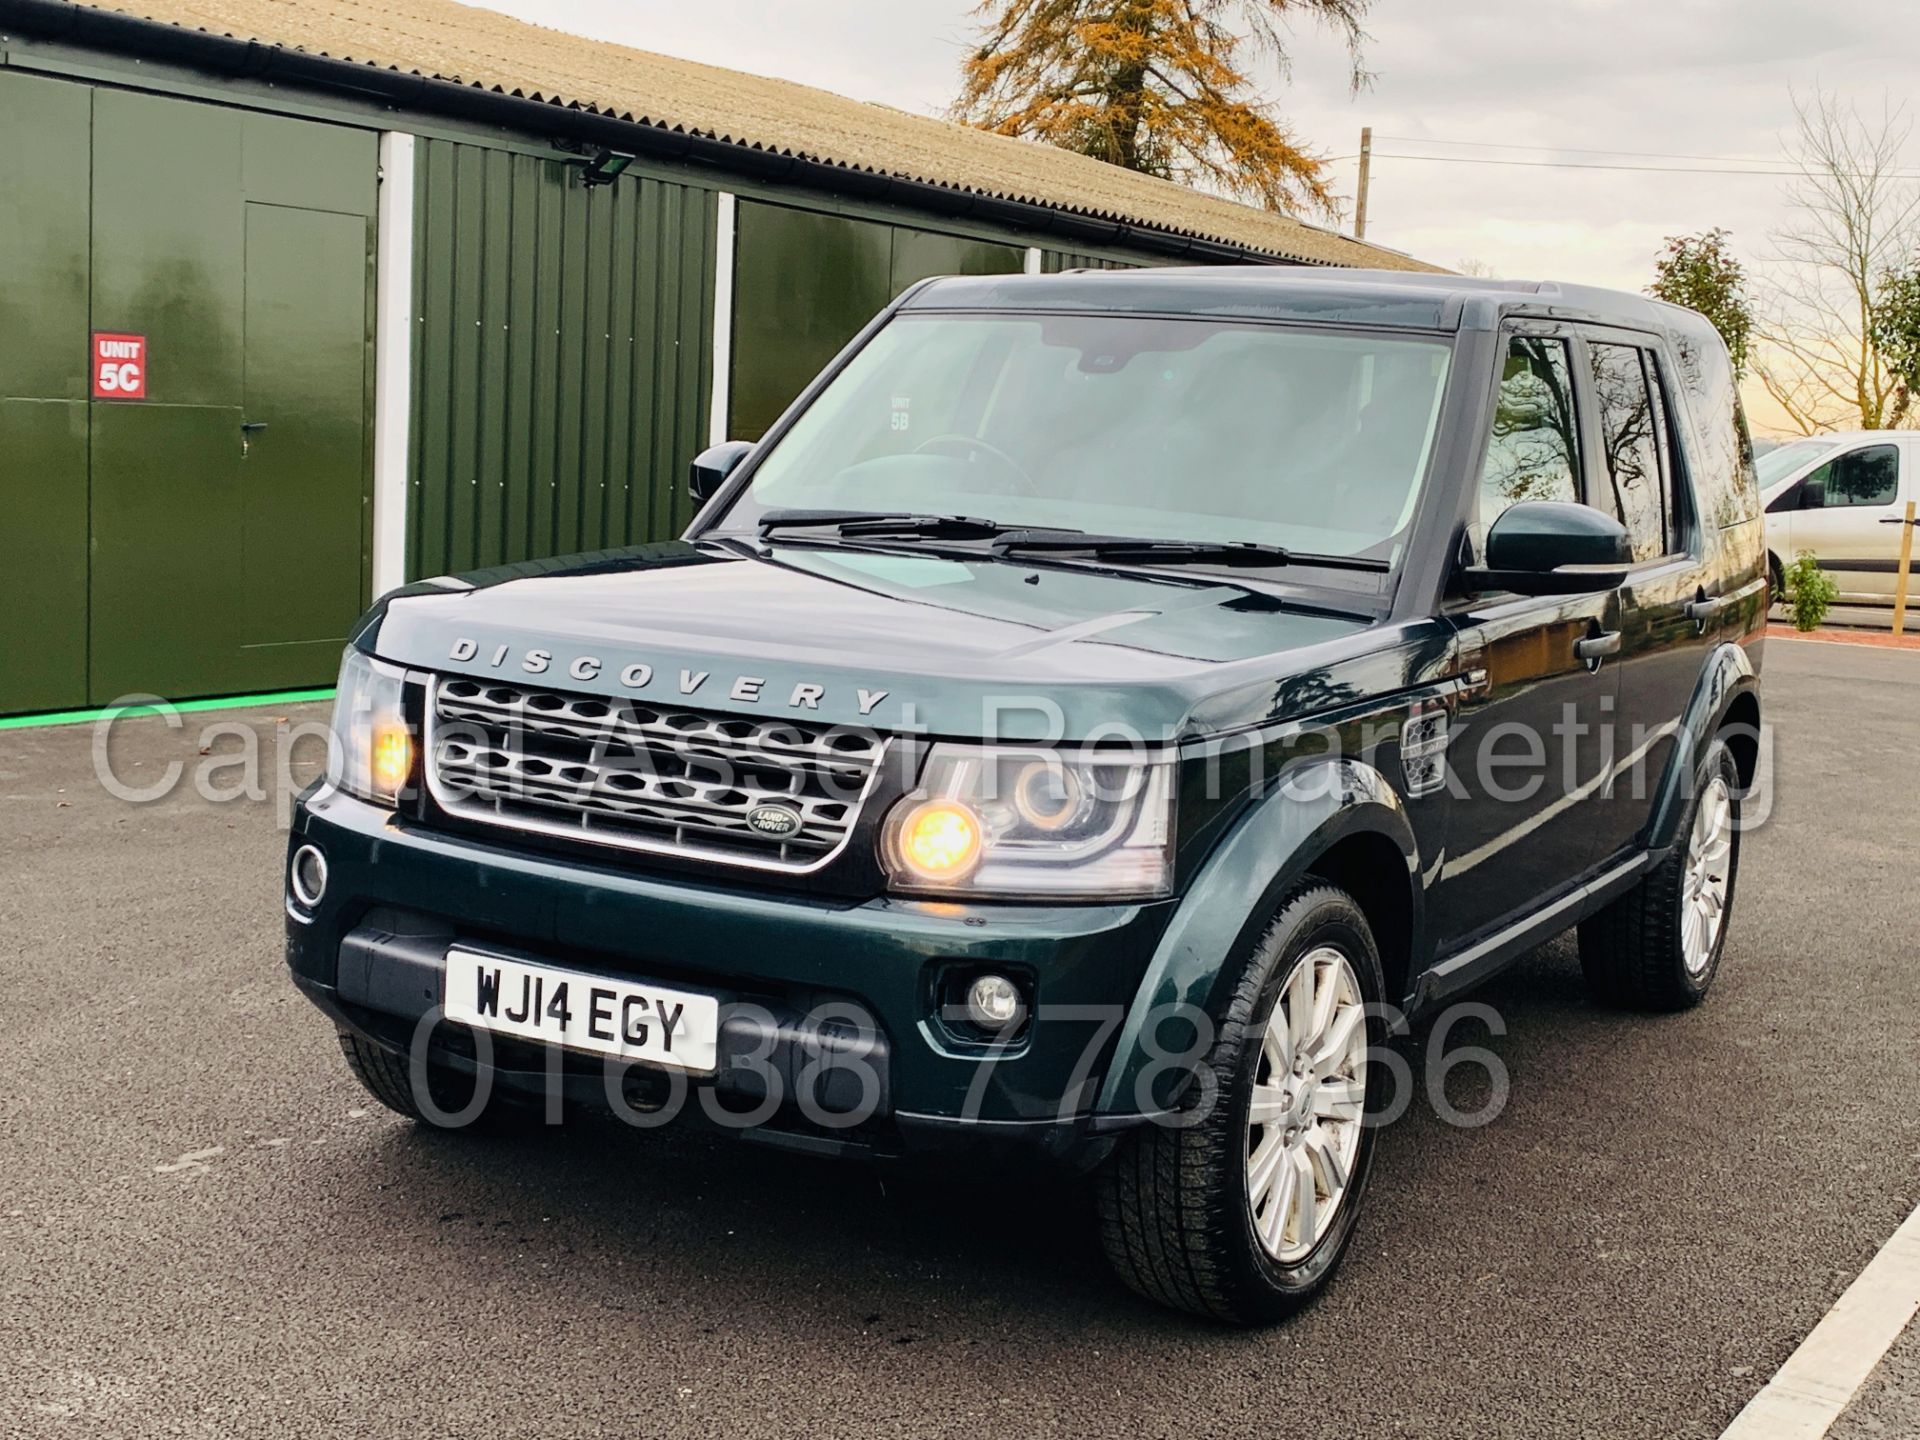 LAND ROVER DISCOVERY 4 *XS EDITION* UTILITY COMMERCIAL (2014) '3.0 SDV6 - 8 SPEED AUTO' *TOP SPEC* - Bild 2 aus 49